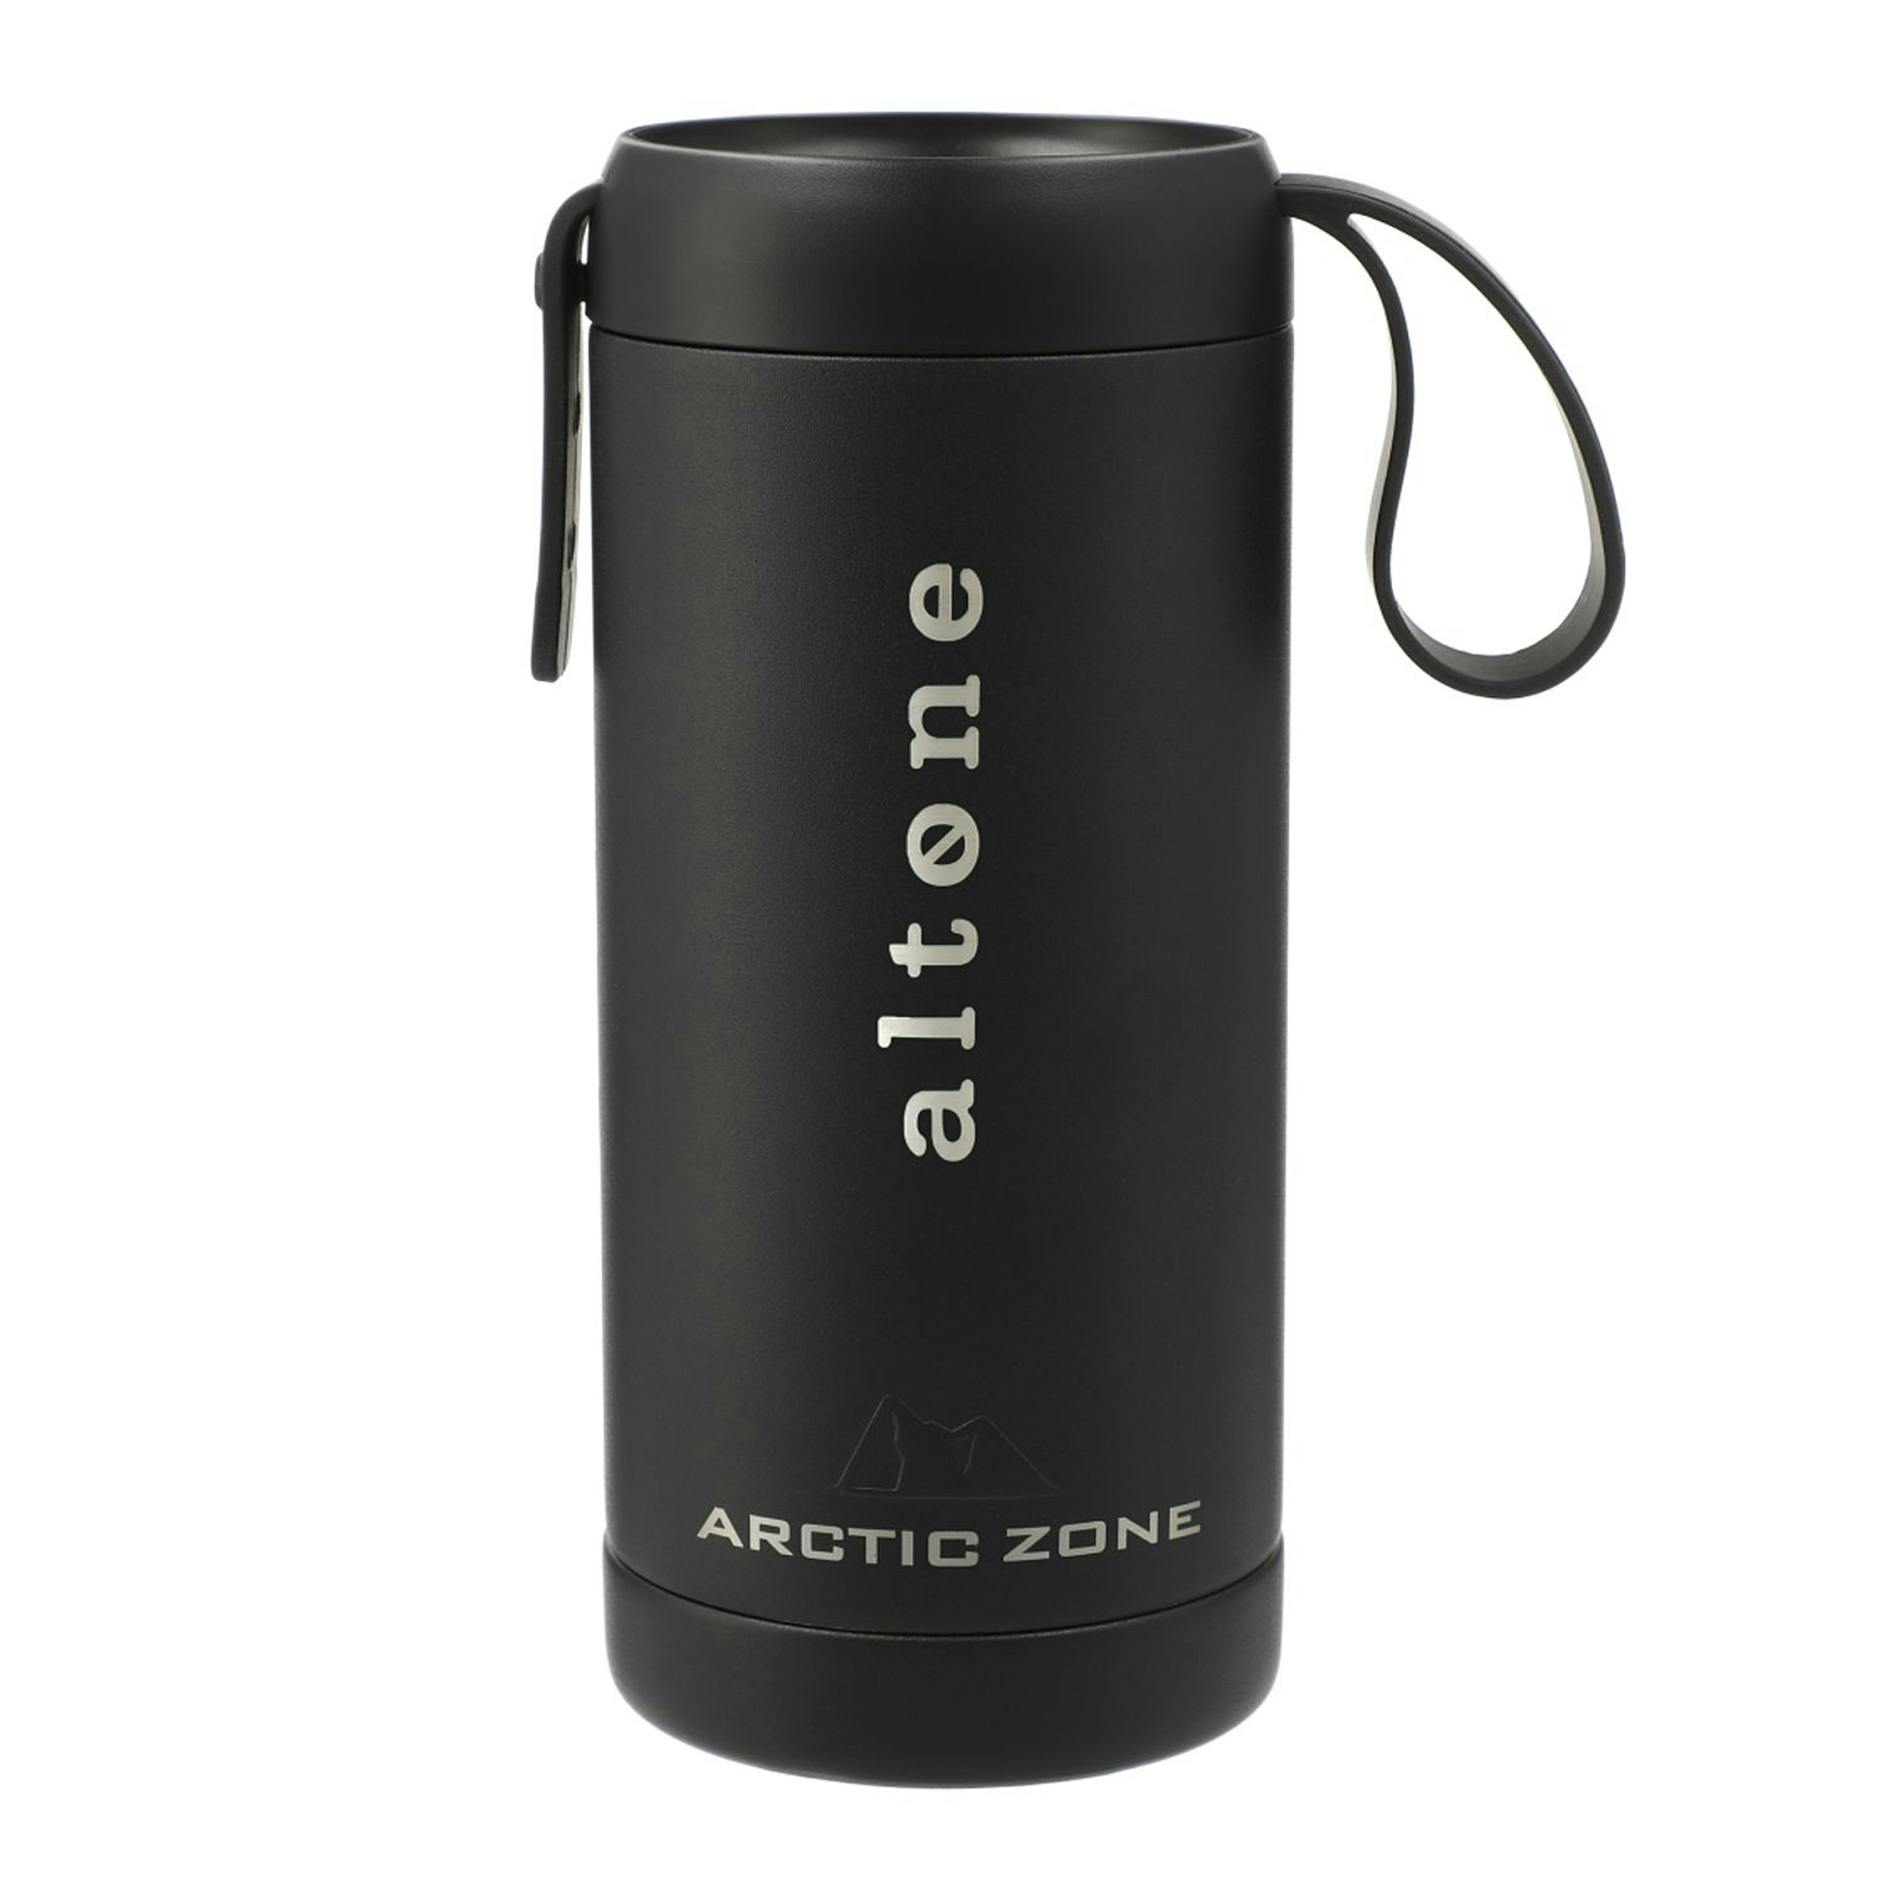 Arctic Zone Titan 20 oz Meal Container - additional Image 2